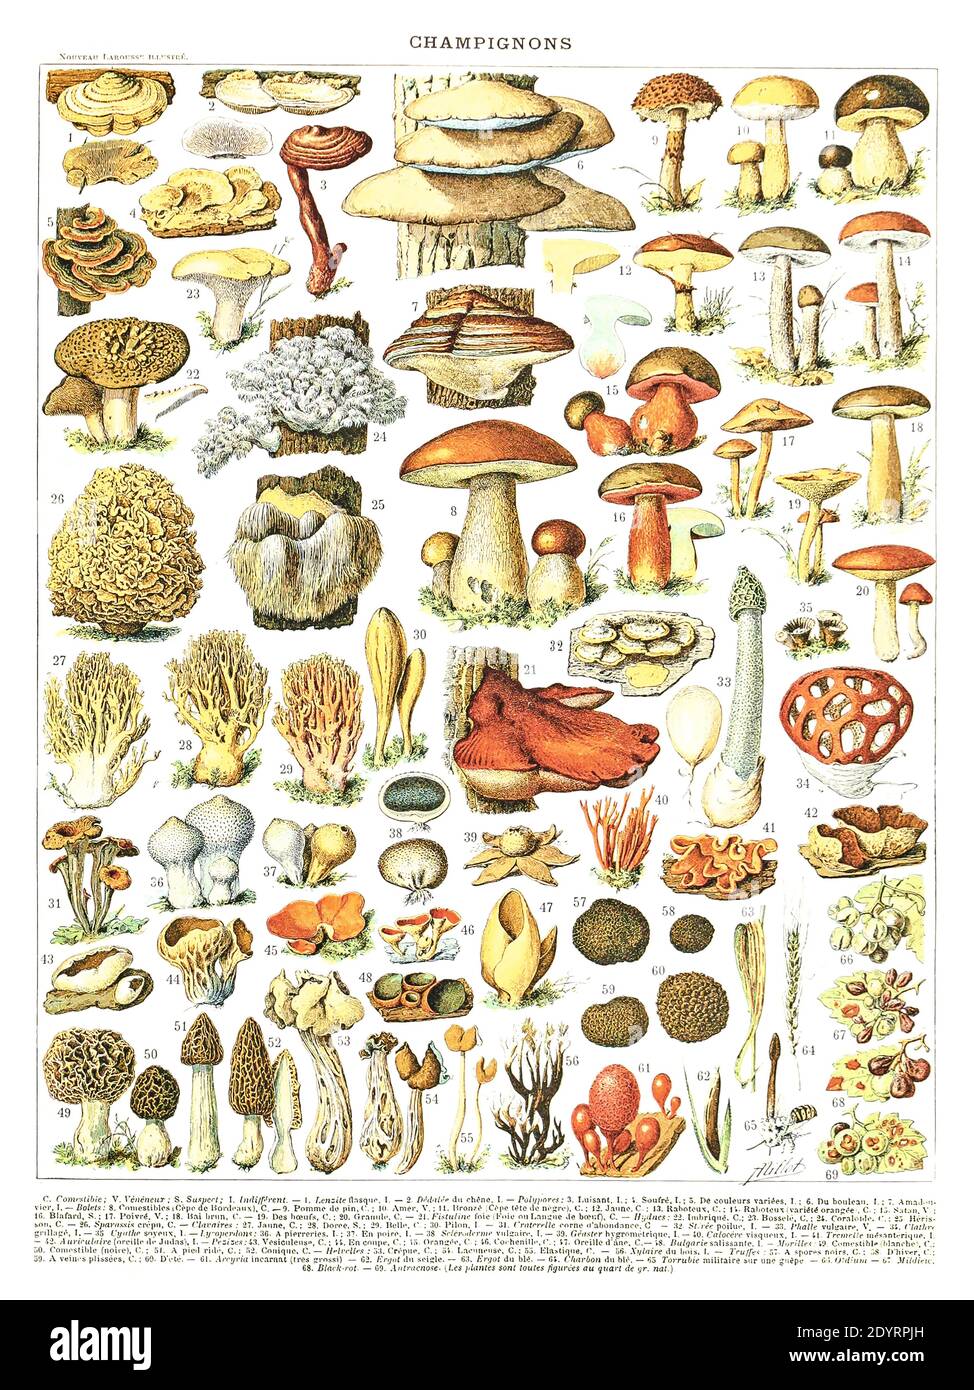 Champignons by Adolphe Millot 1905 Vintage illustration of Mushrooms. Digitally enchanted and high resolution photographic reproduction. Stock Photo